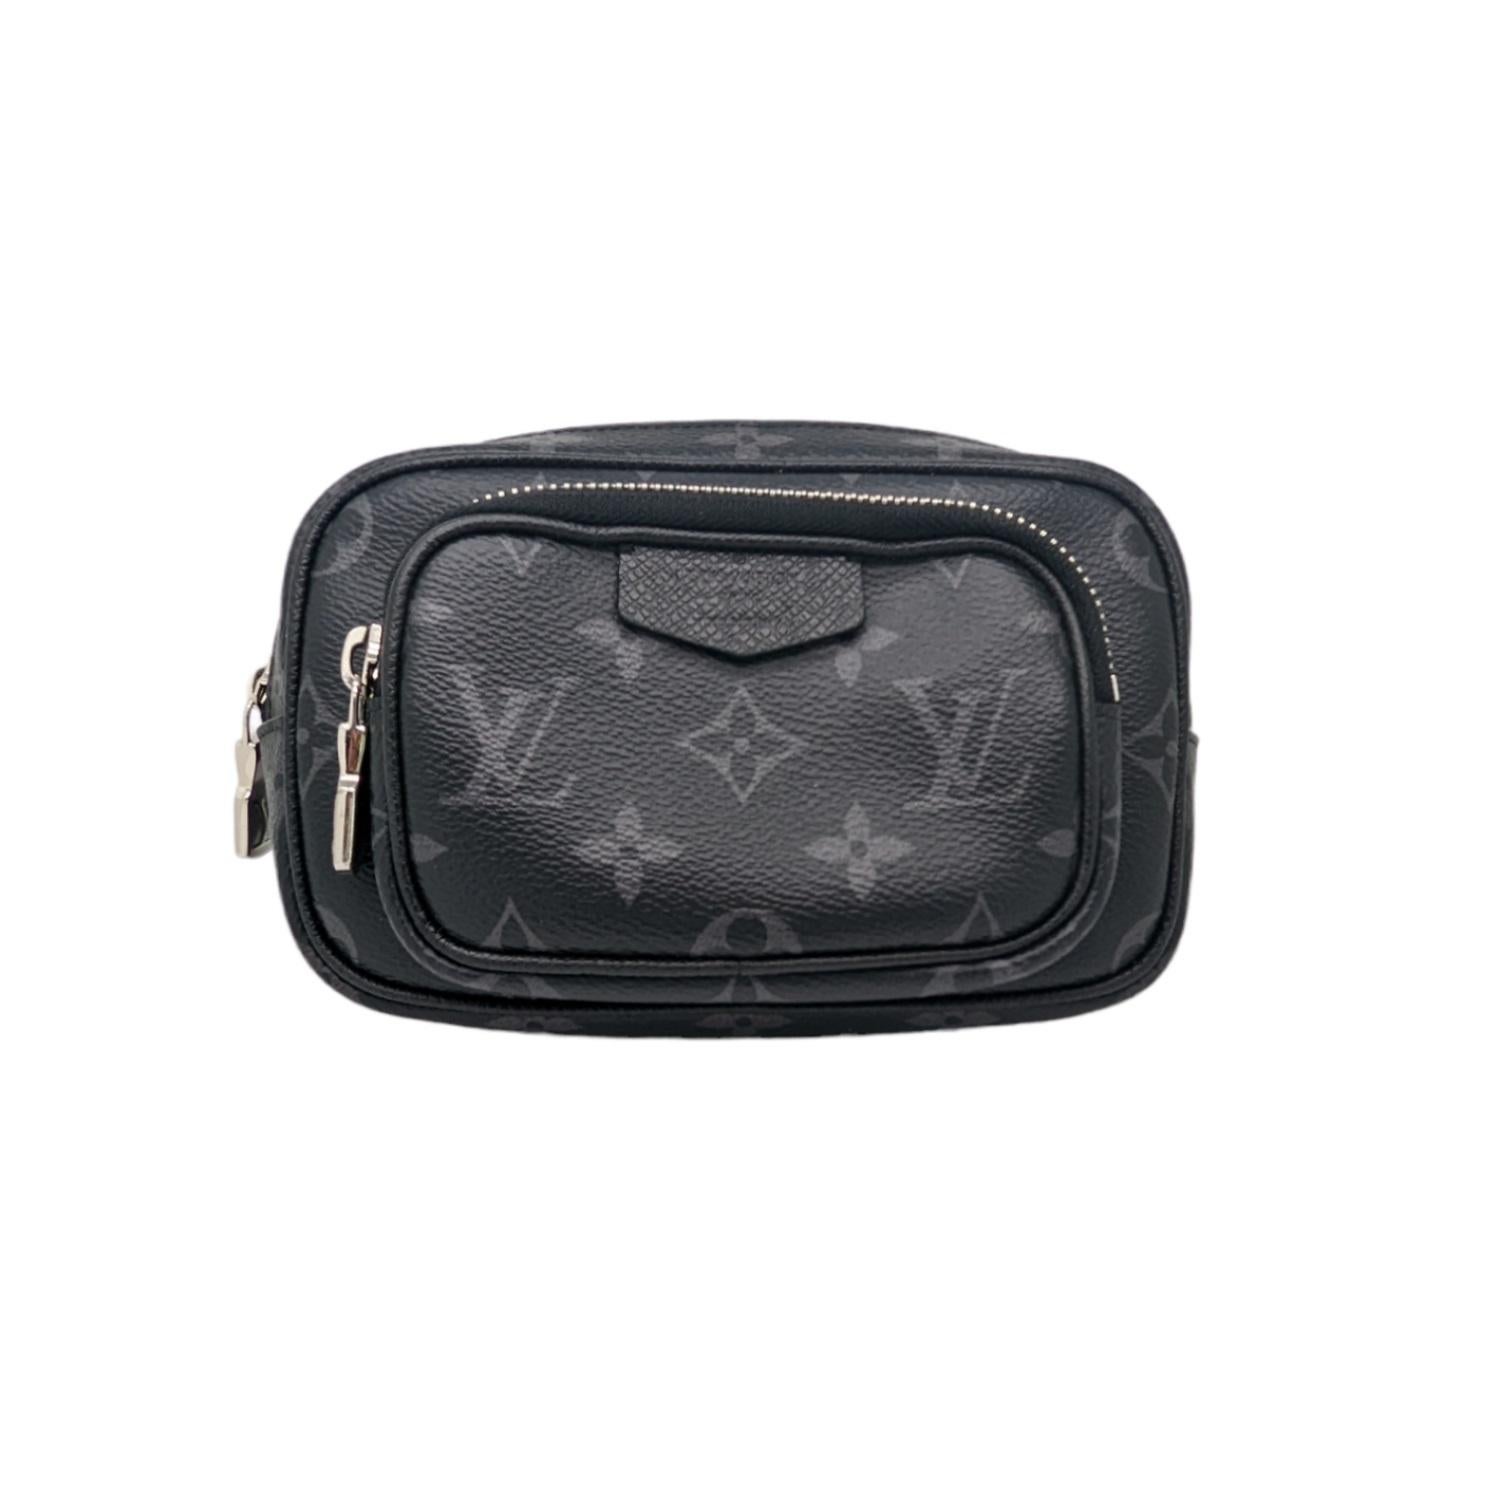 This stylish shoulder bag is crafted of cross-grain taiga leather, with classic Louis Vuitton monogram Eclipse coated canvas. The bag features a front zipper pocket and an adjustable coated canvas shoulder strap with polished silver hardware. The